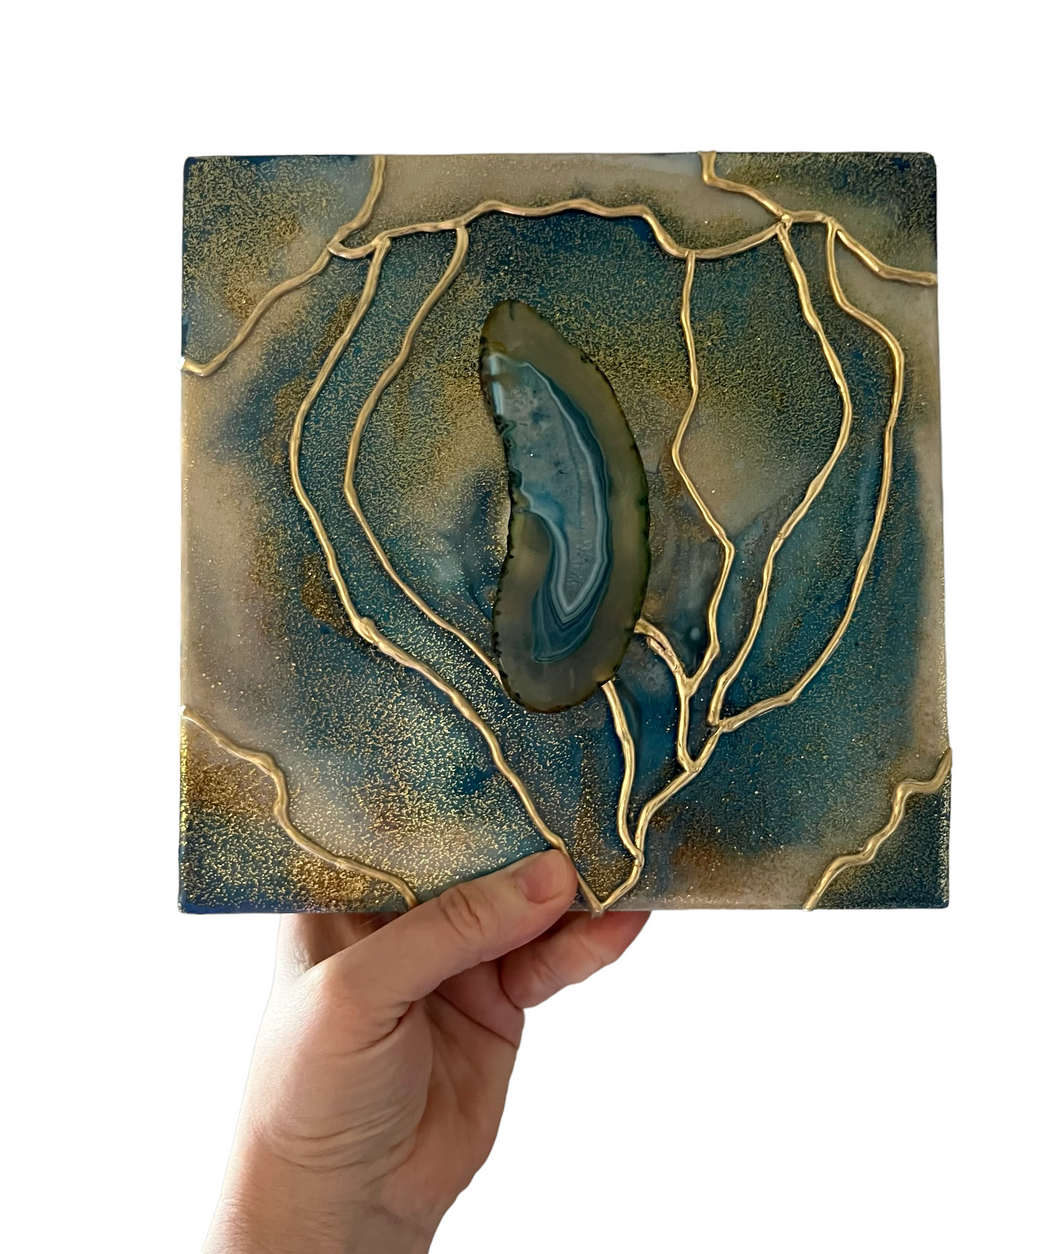 EMOTIONAL STRENGTH / Agate Slice / Geode Inspired Wall Art / One of a Kind / Resin Art